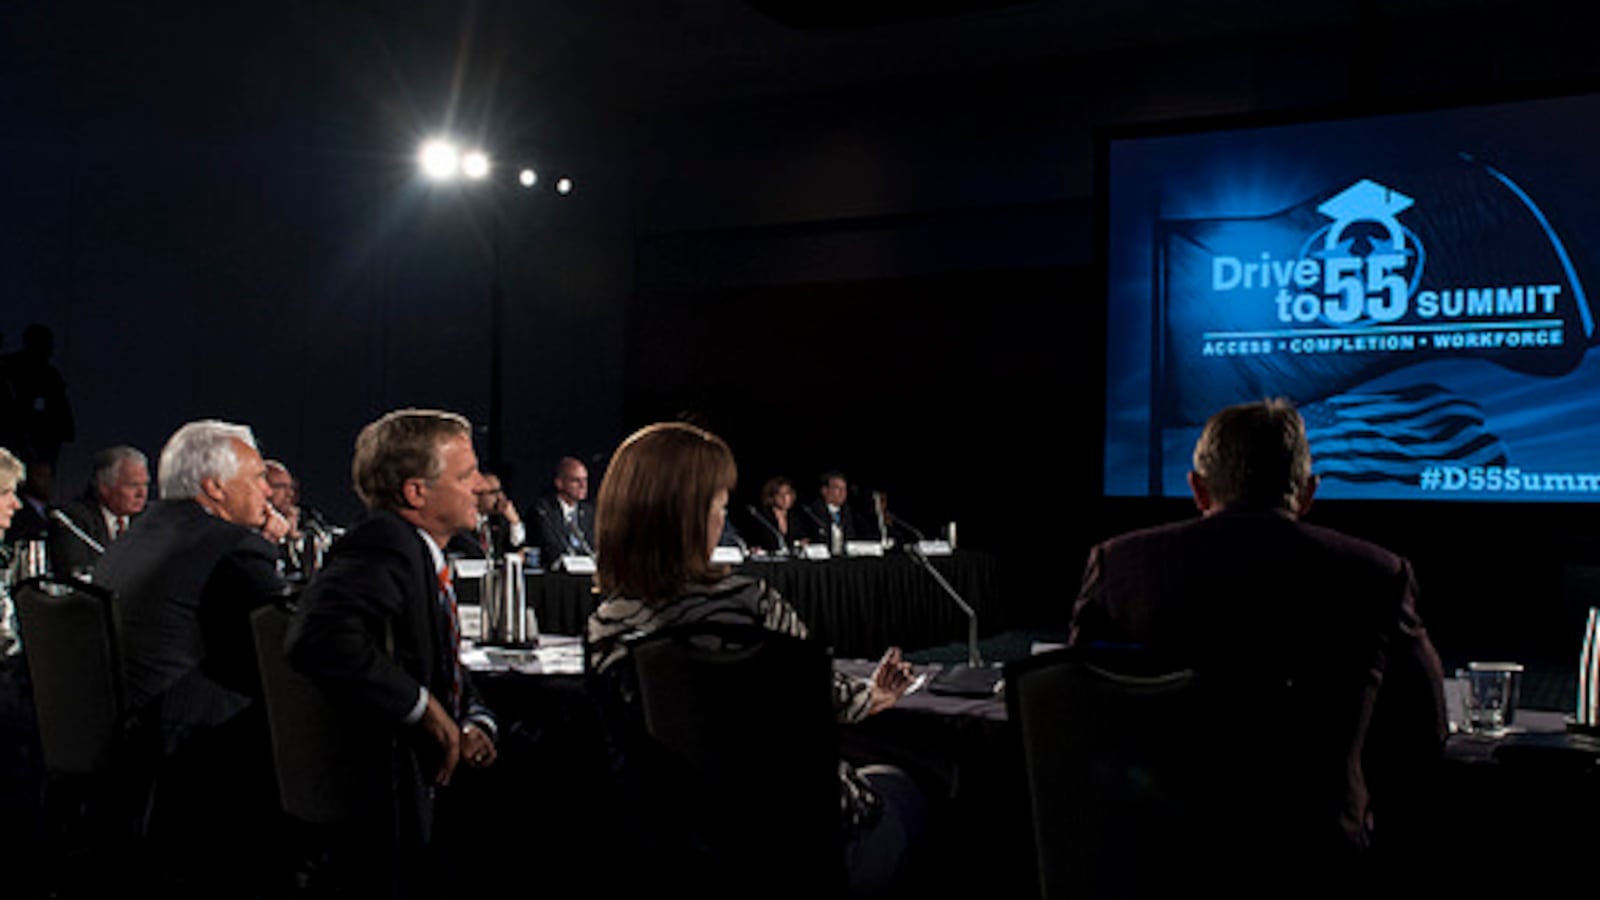 Gov. Bill Haslam moderates the Drive to 55 Summit in Nashville, bringing together government, business and education leaders to discuss how to prepare students for college and work.